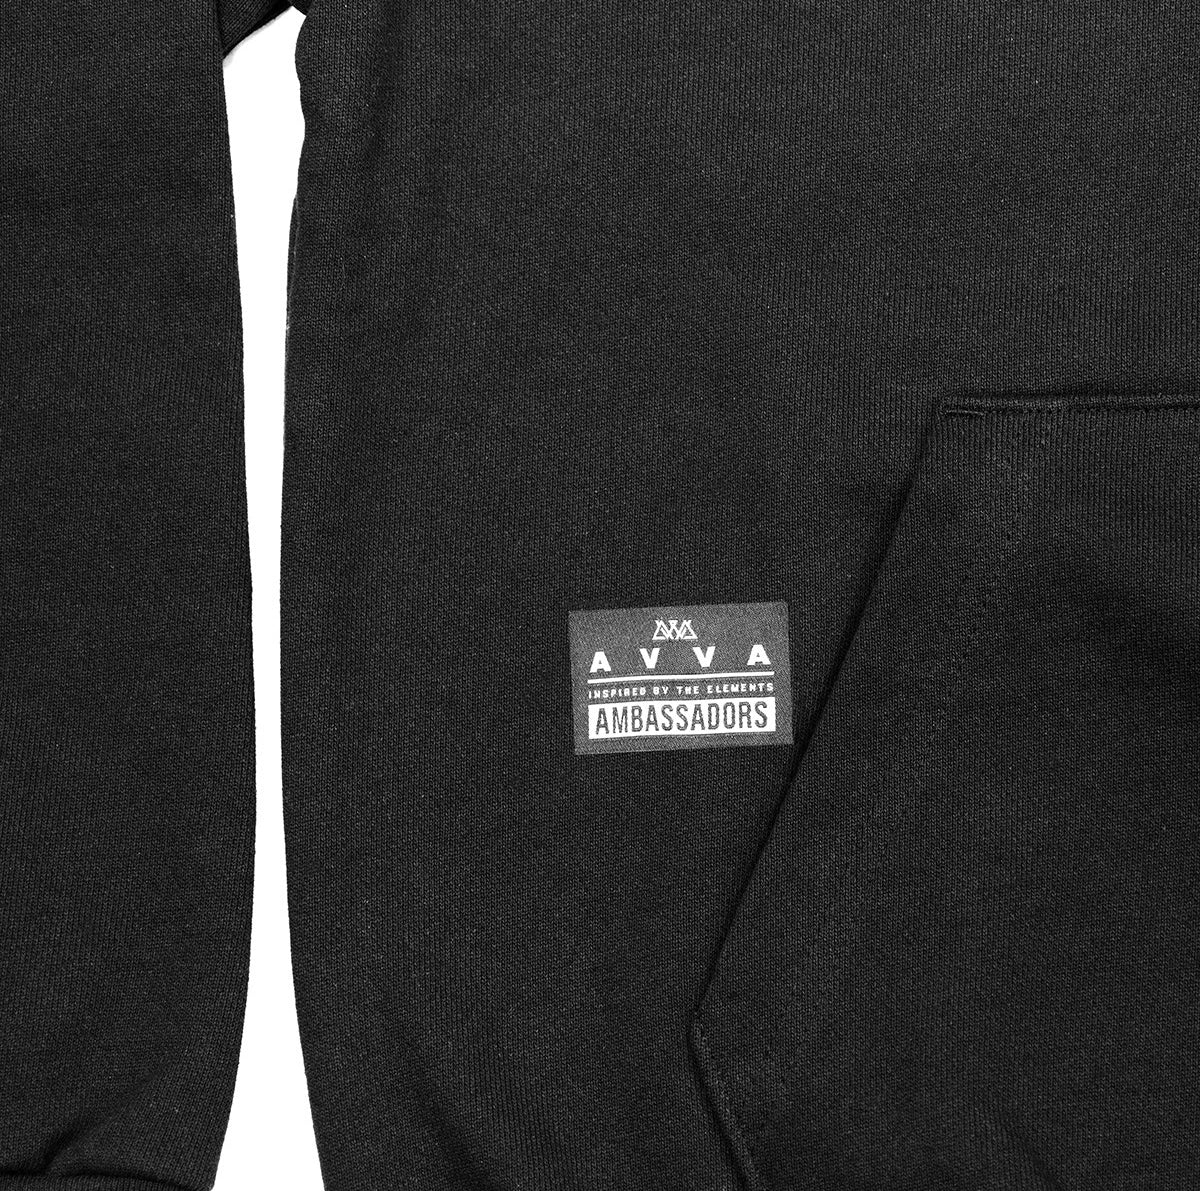 CLOSE UP VIEW OF AVVA PATCH ON NTHE HOODIE